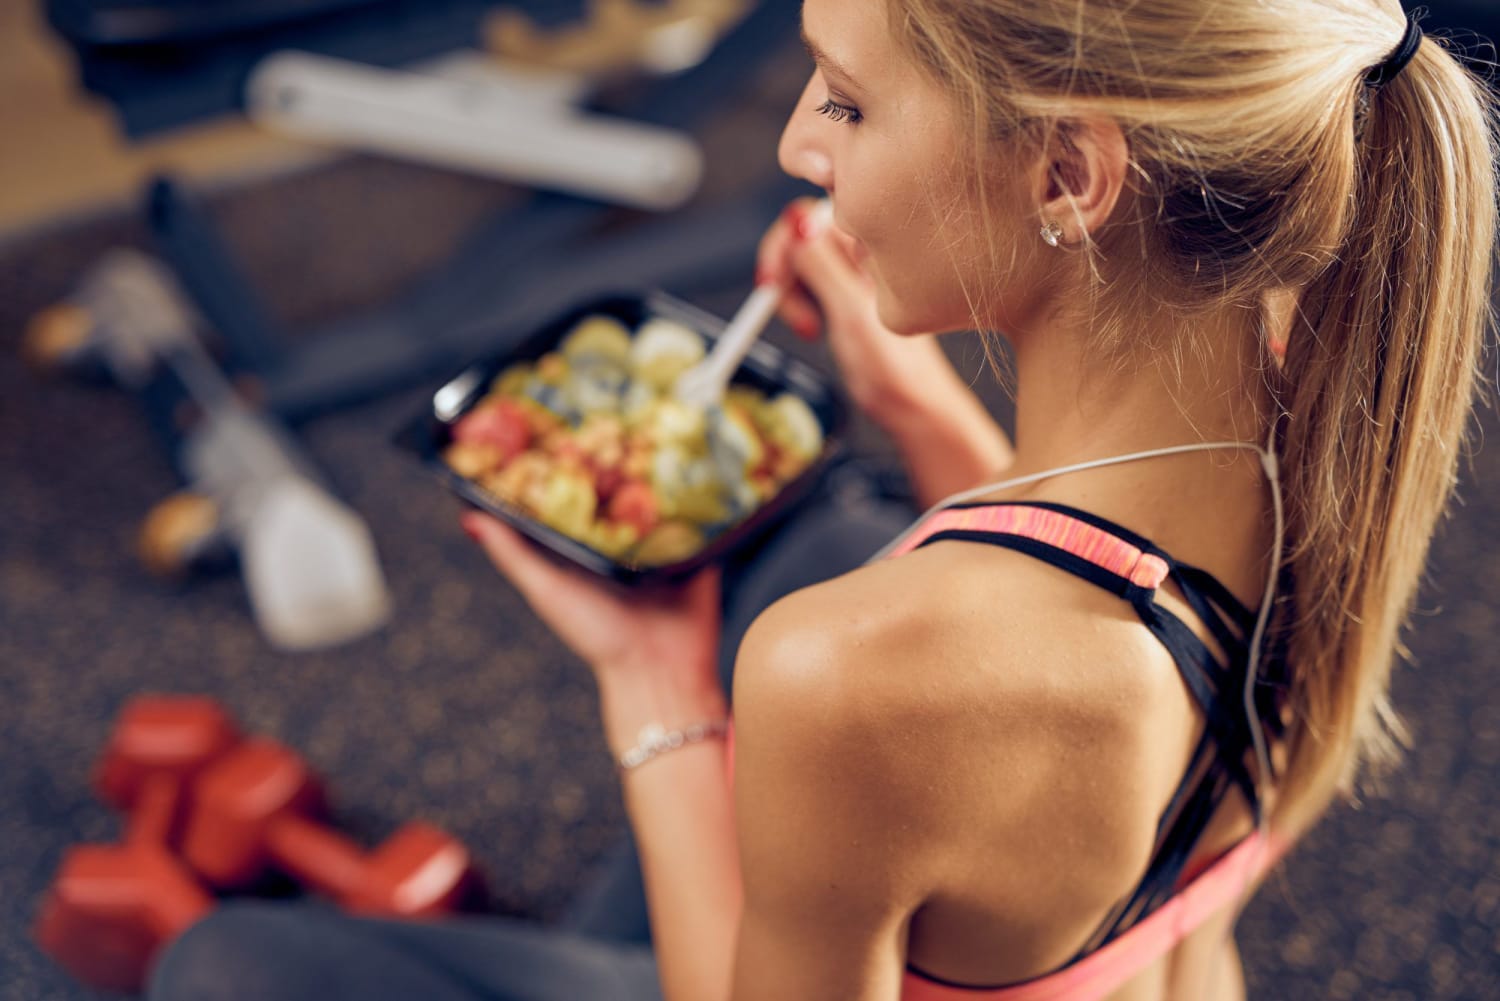 The 7 Best Foods to Eat After a Workout